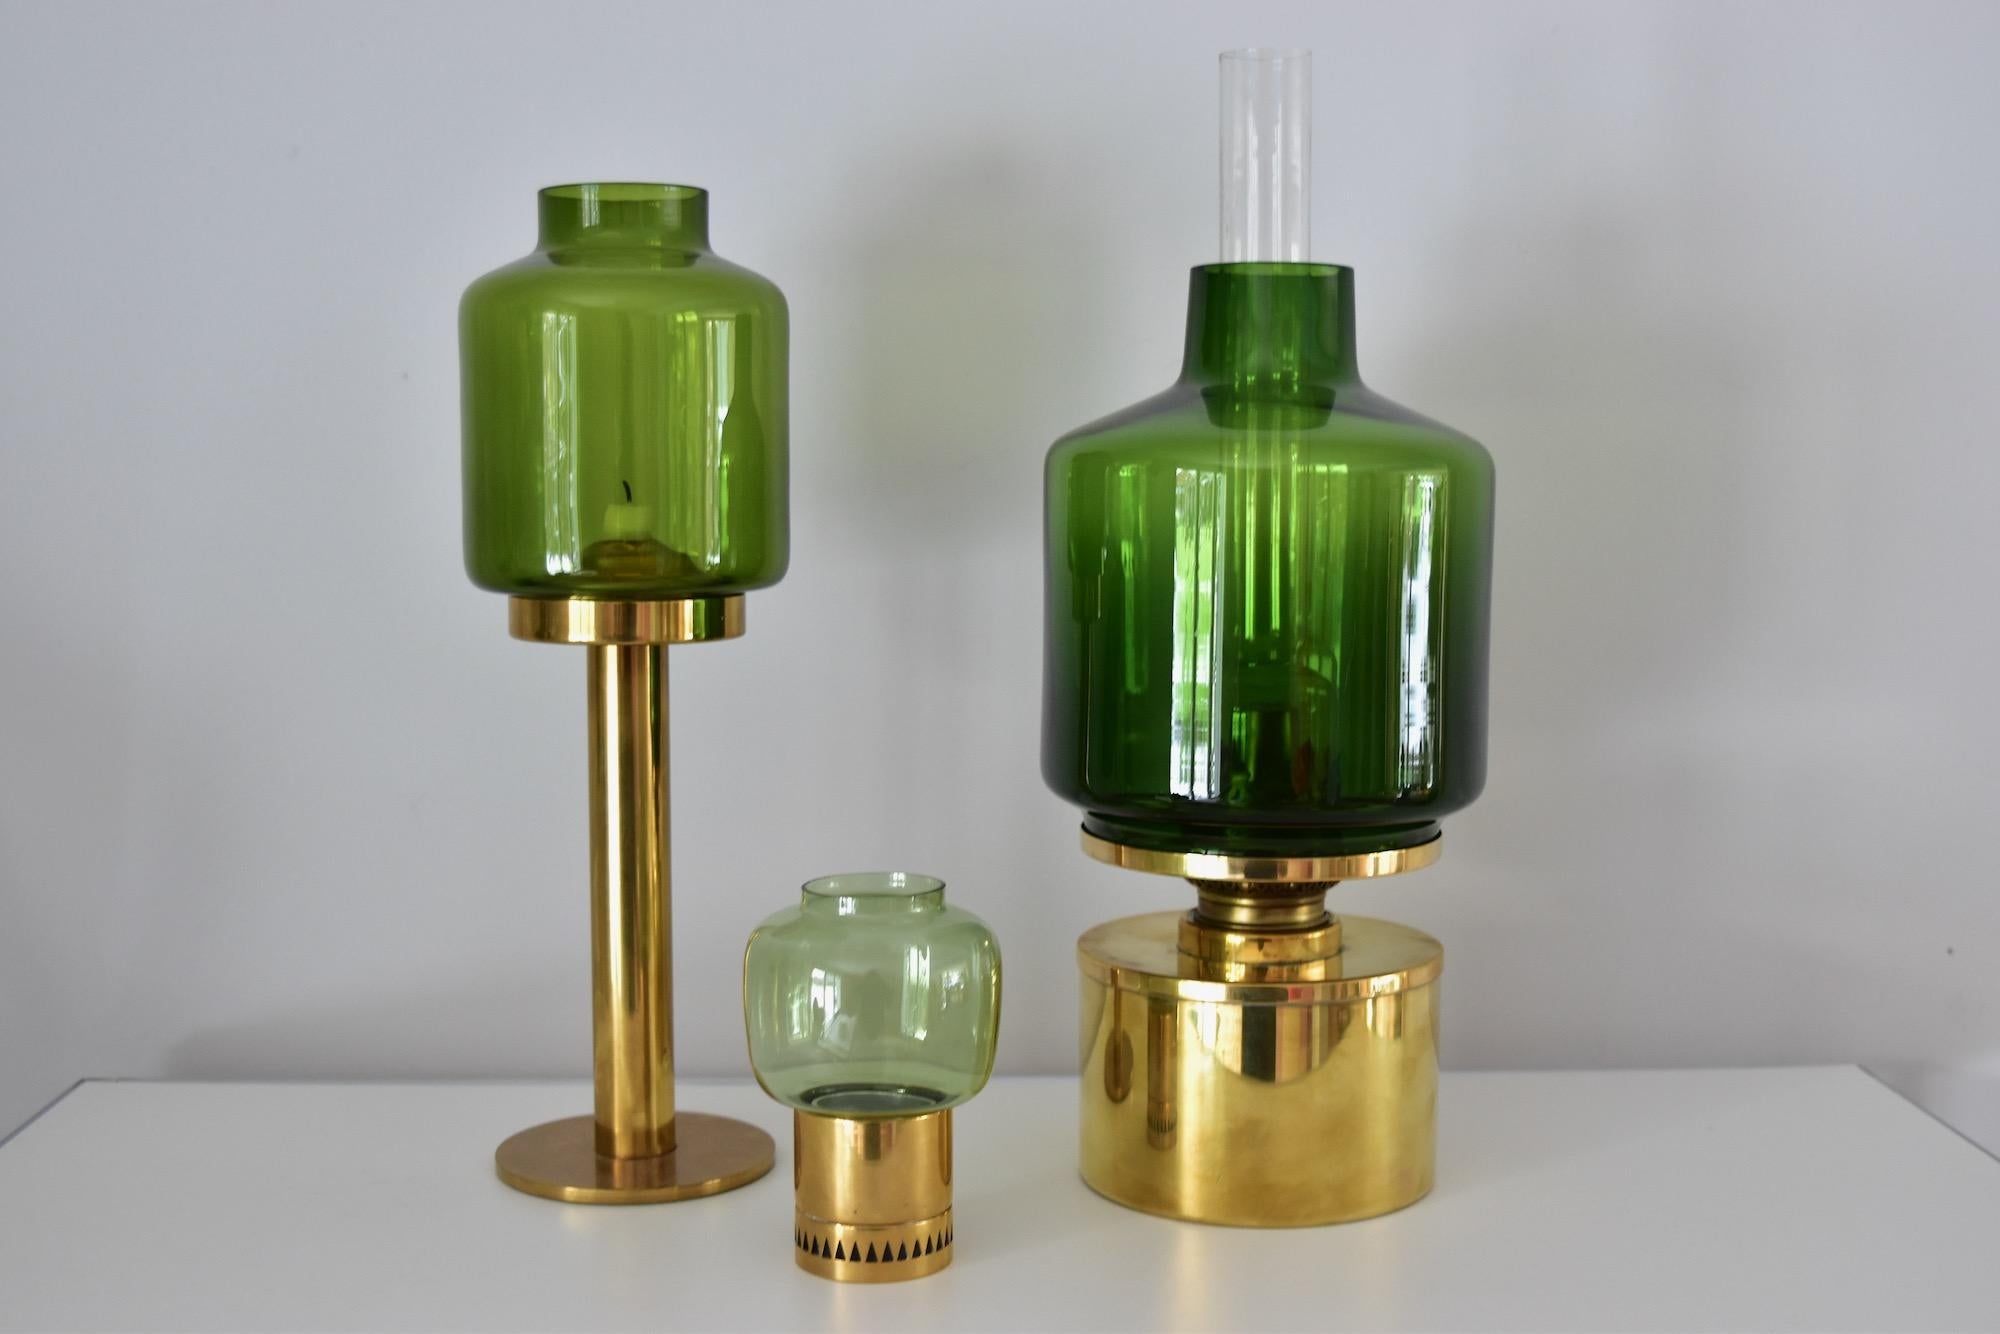 Beautiful candlesticks by Hans-Agne Jakobsson.
Measurements: Diameter 8cm, height 12cm
Green glass and brass base.
Very nice condition. Price for one candleholder.

    